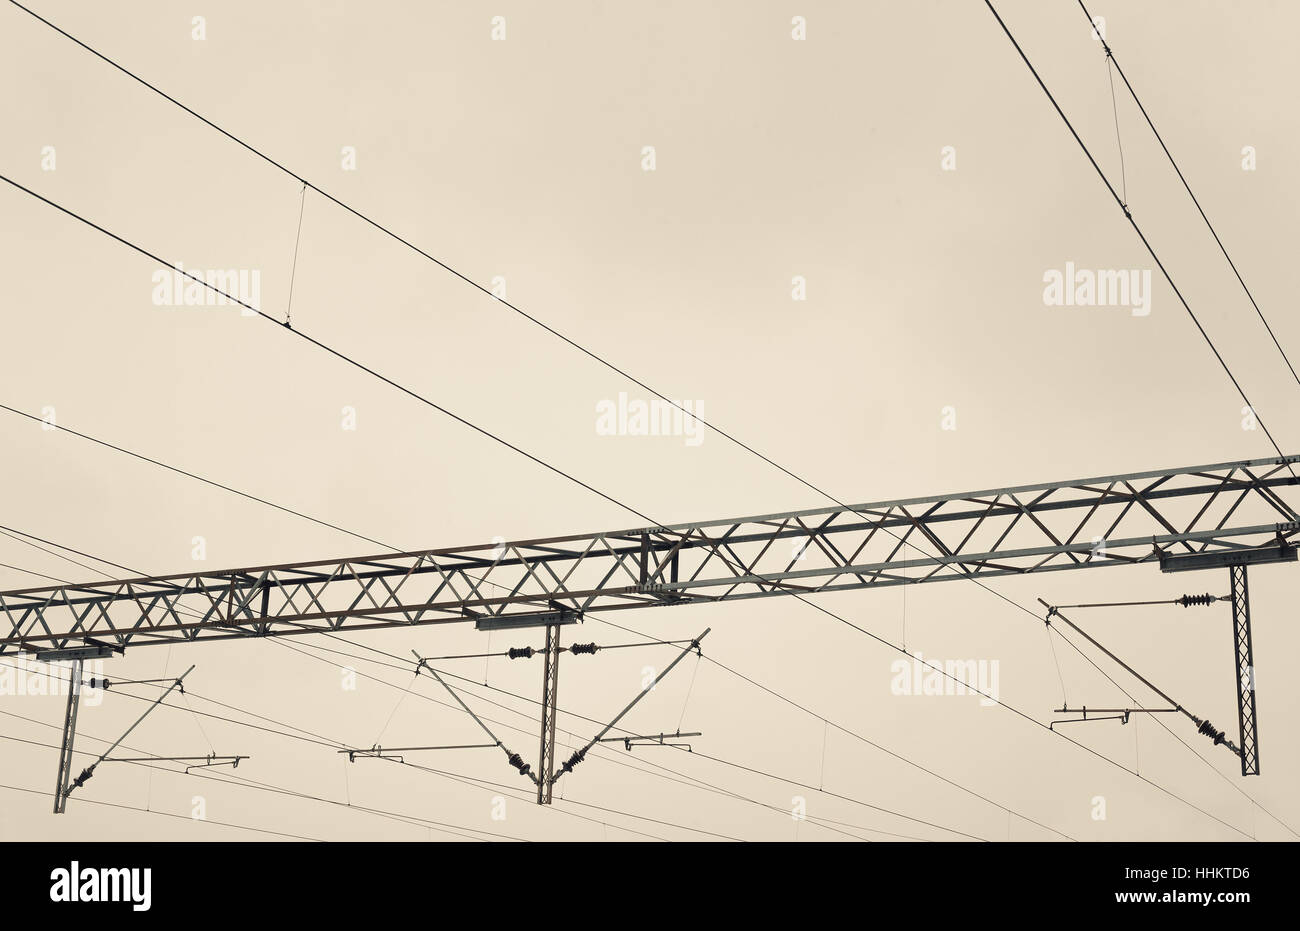 Abstract composition of railway electric wires. Stock Photo